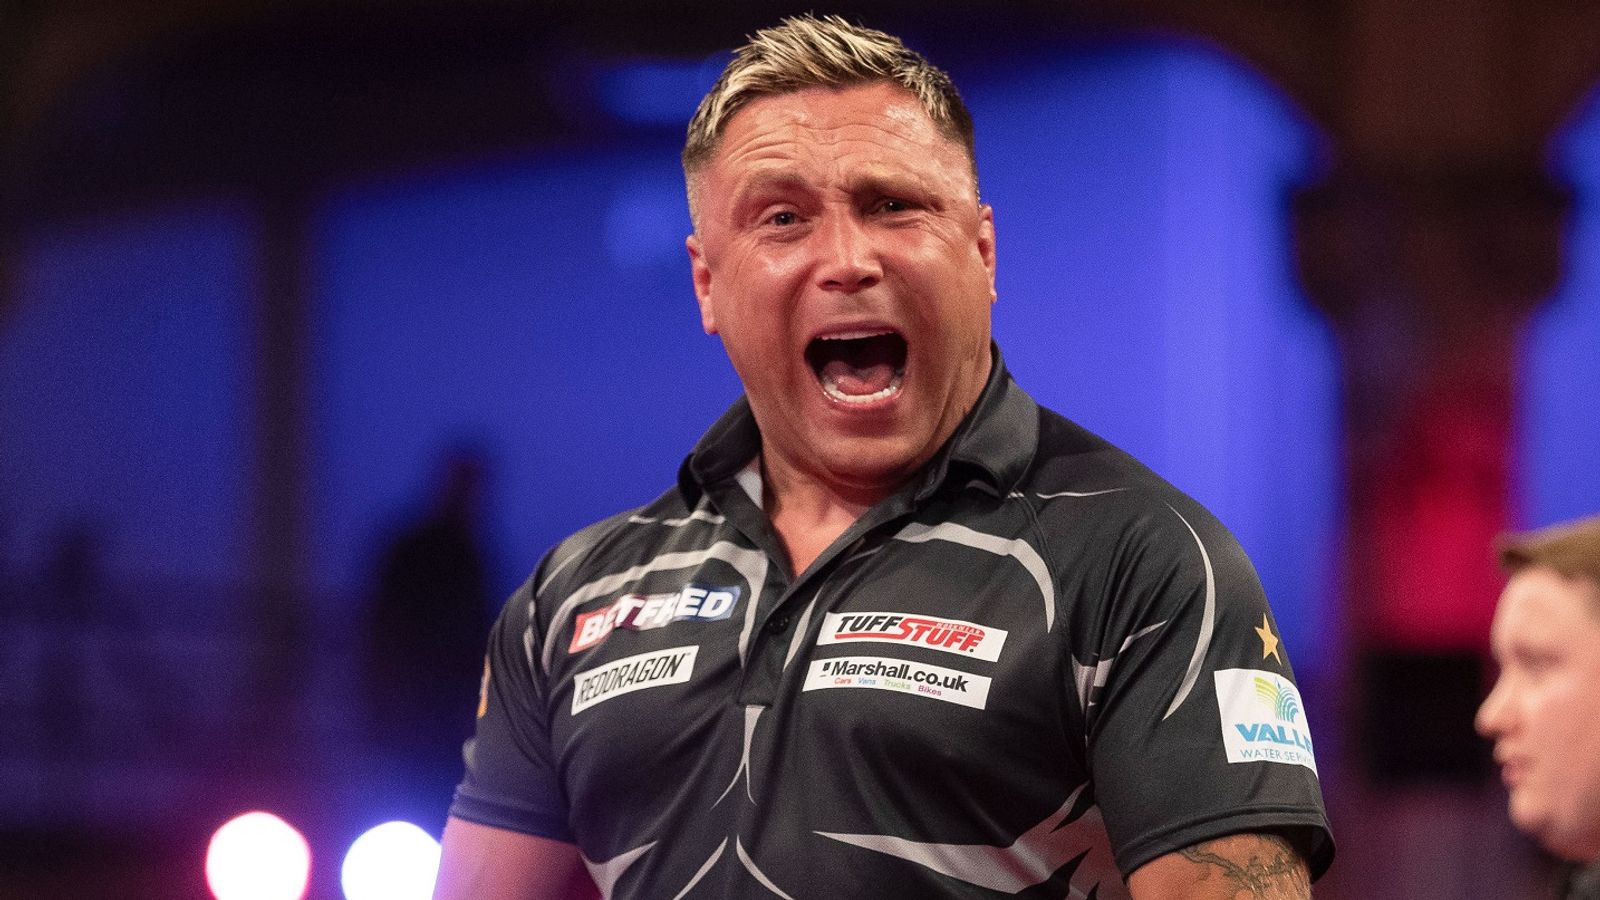 World Grand Prix Darts: Gerwyn Price meets Joe Cullen, while Daryl Gurney and Nathan Aspinall are also in action